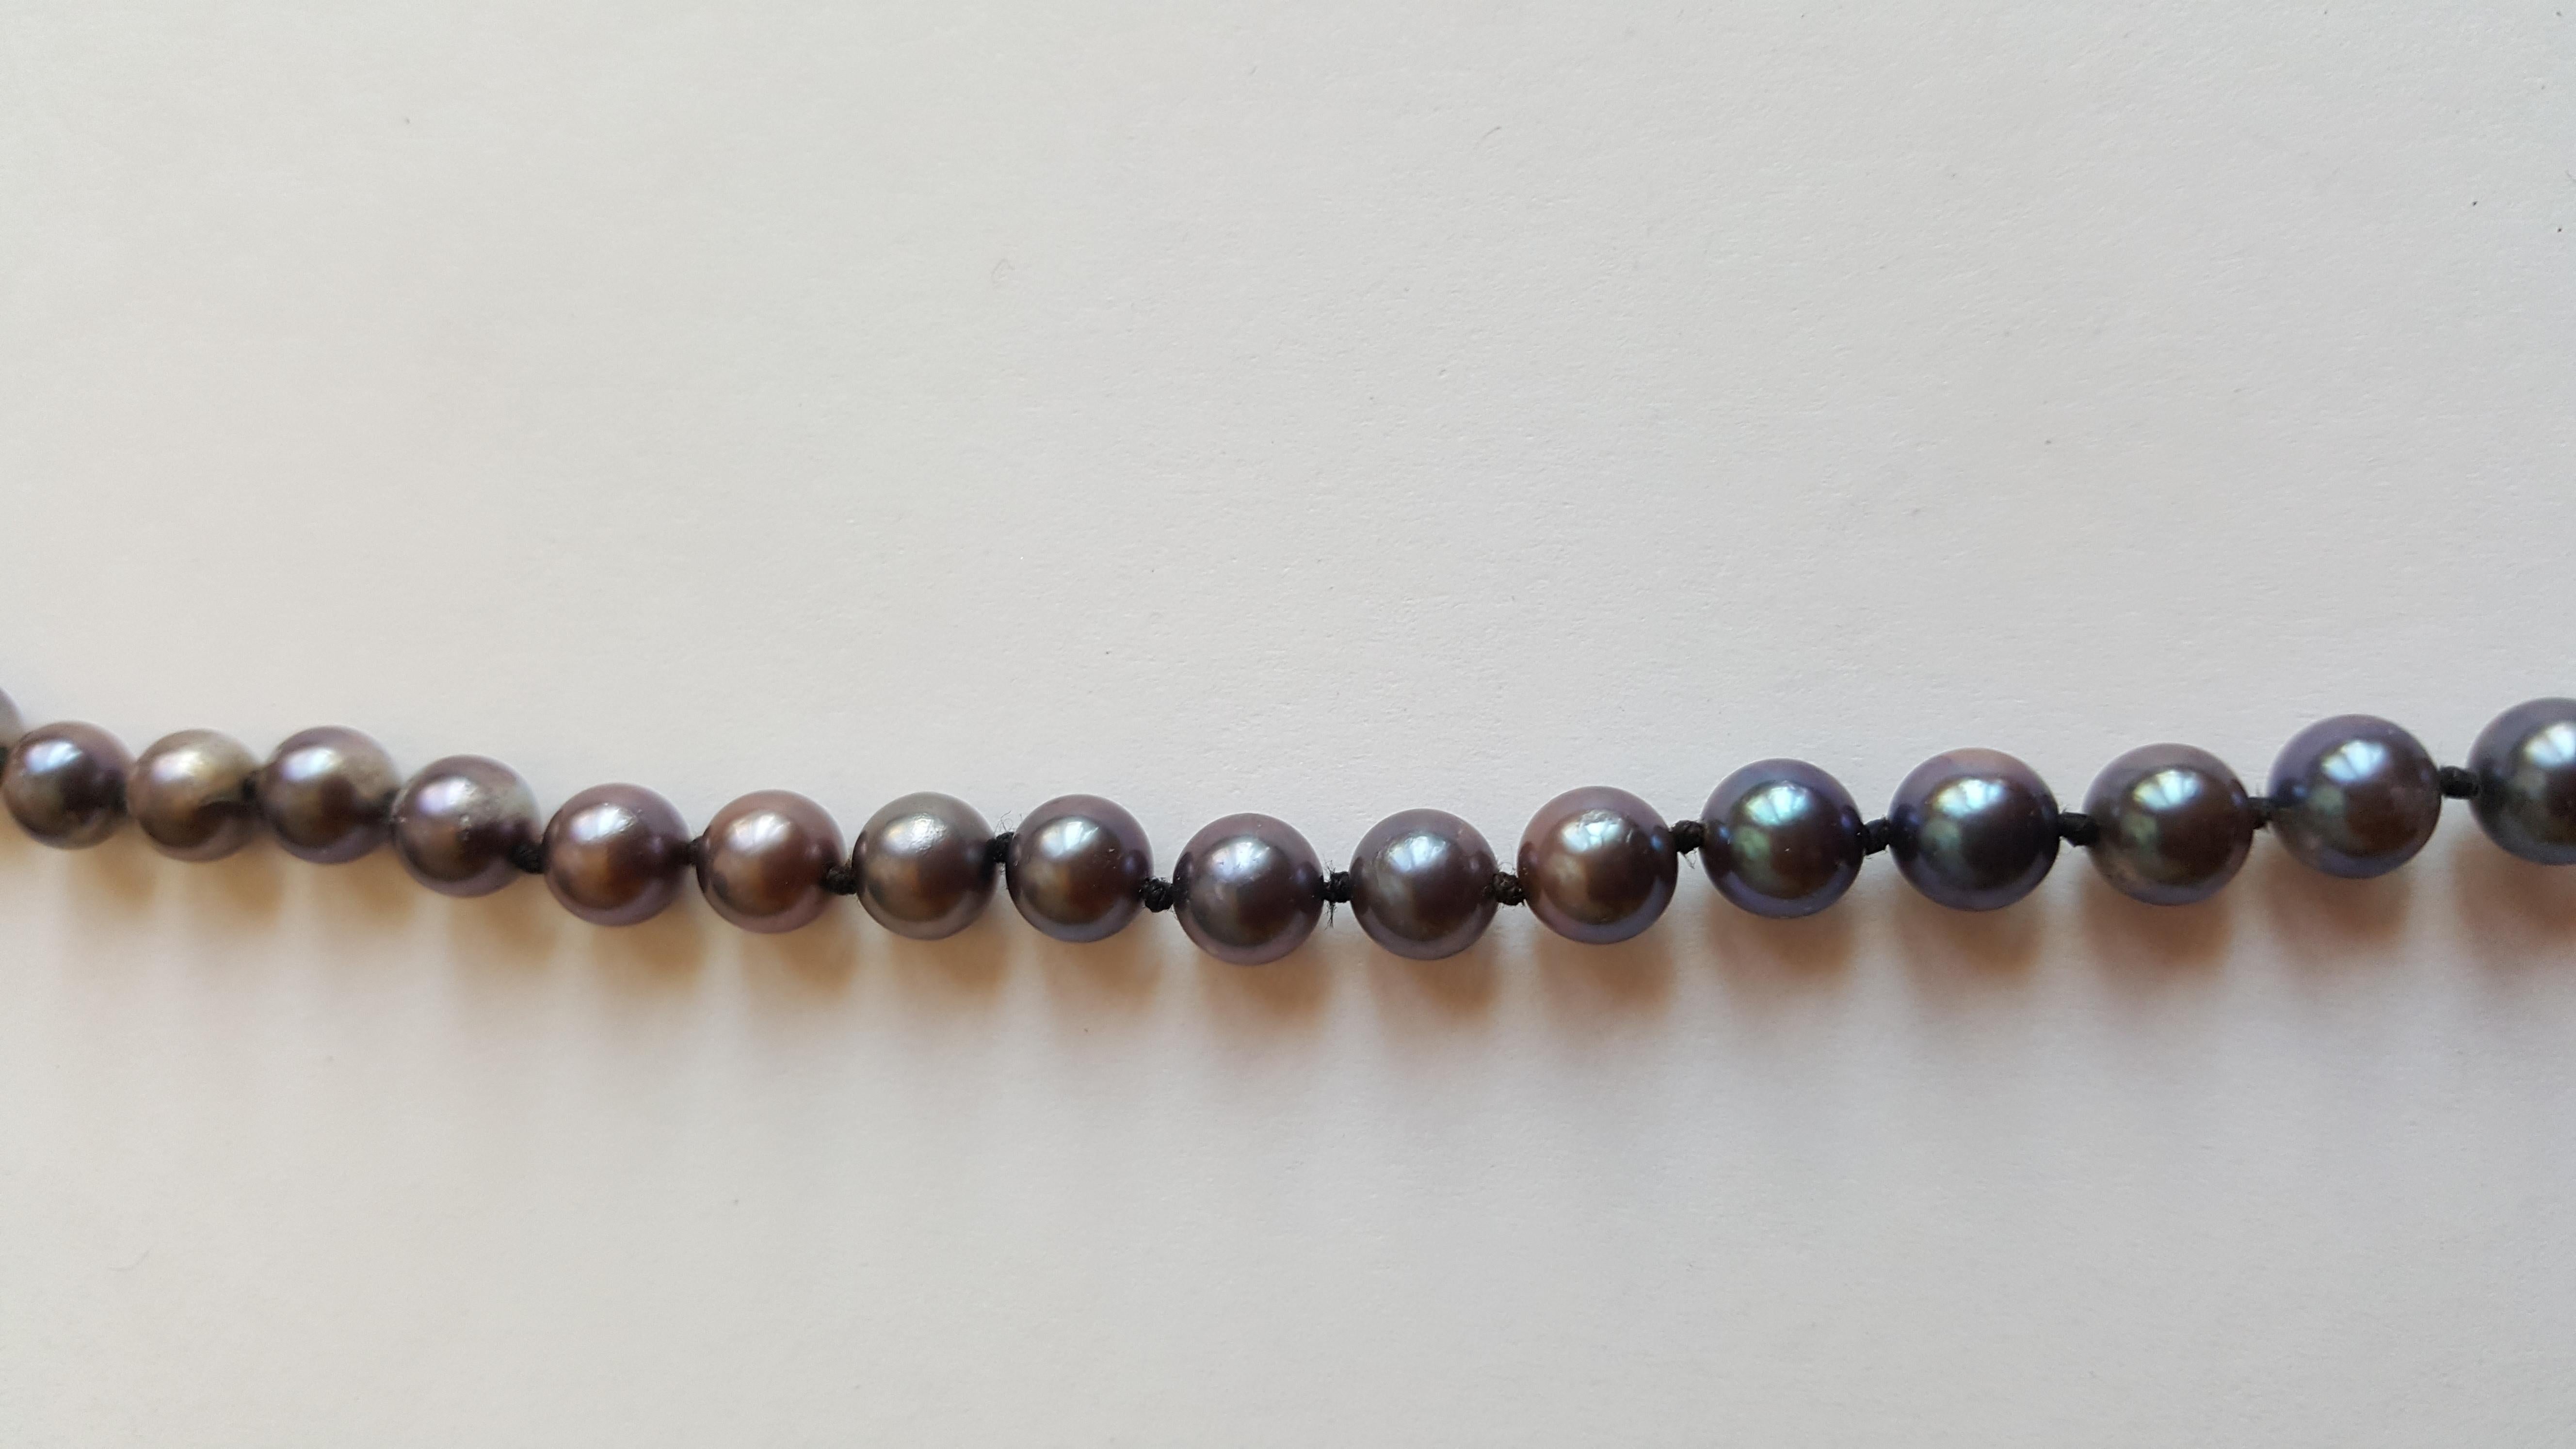 18 inch 5.8mm pearl strand that has cultured pearl that; treated to richen the color to a deep blue silver. Pearl color is vibrant and versatile. The nacre of the pearls is lustrous and clean. Please let us know if you have any questions.

Rock N